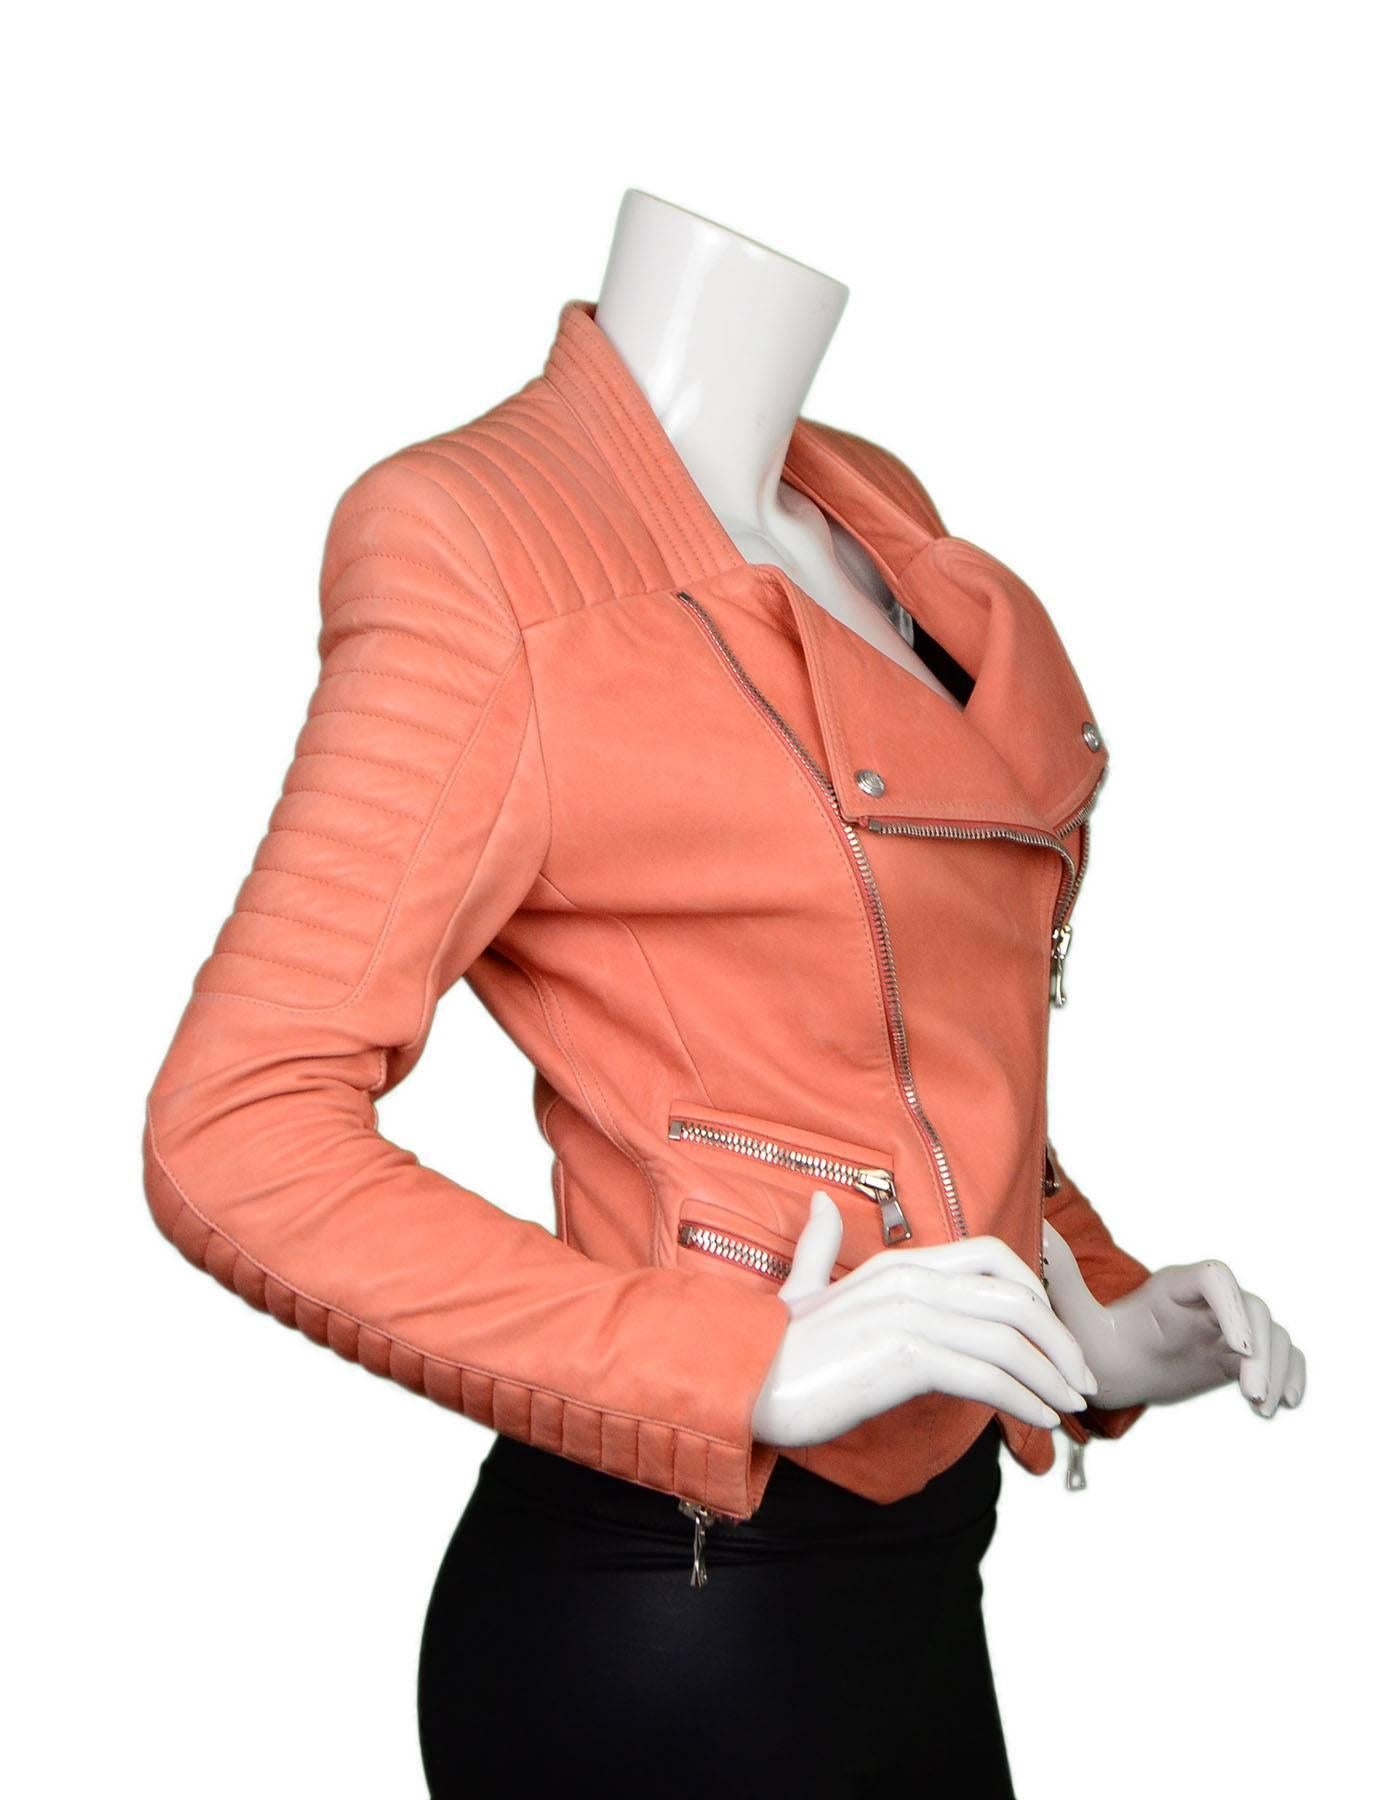 Balmain Salmon Padded Leather Moto Jacket sz FR36
Features padding throughout shoulders and sleeves

Made In: Turkey
Color: Salmon
Composition: 100% lambskin
Lining: Black, 52% viscose, 48% cotton
Closure/Opening: Zip up front
Exterior